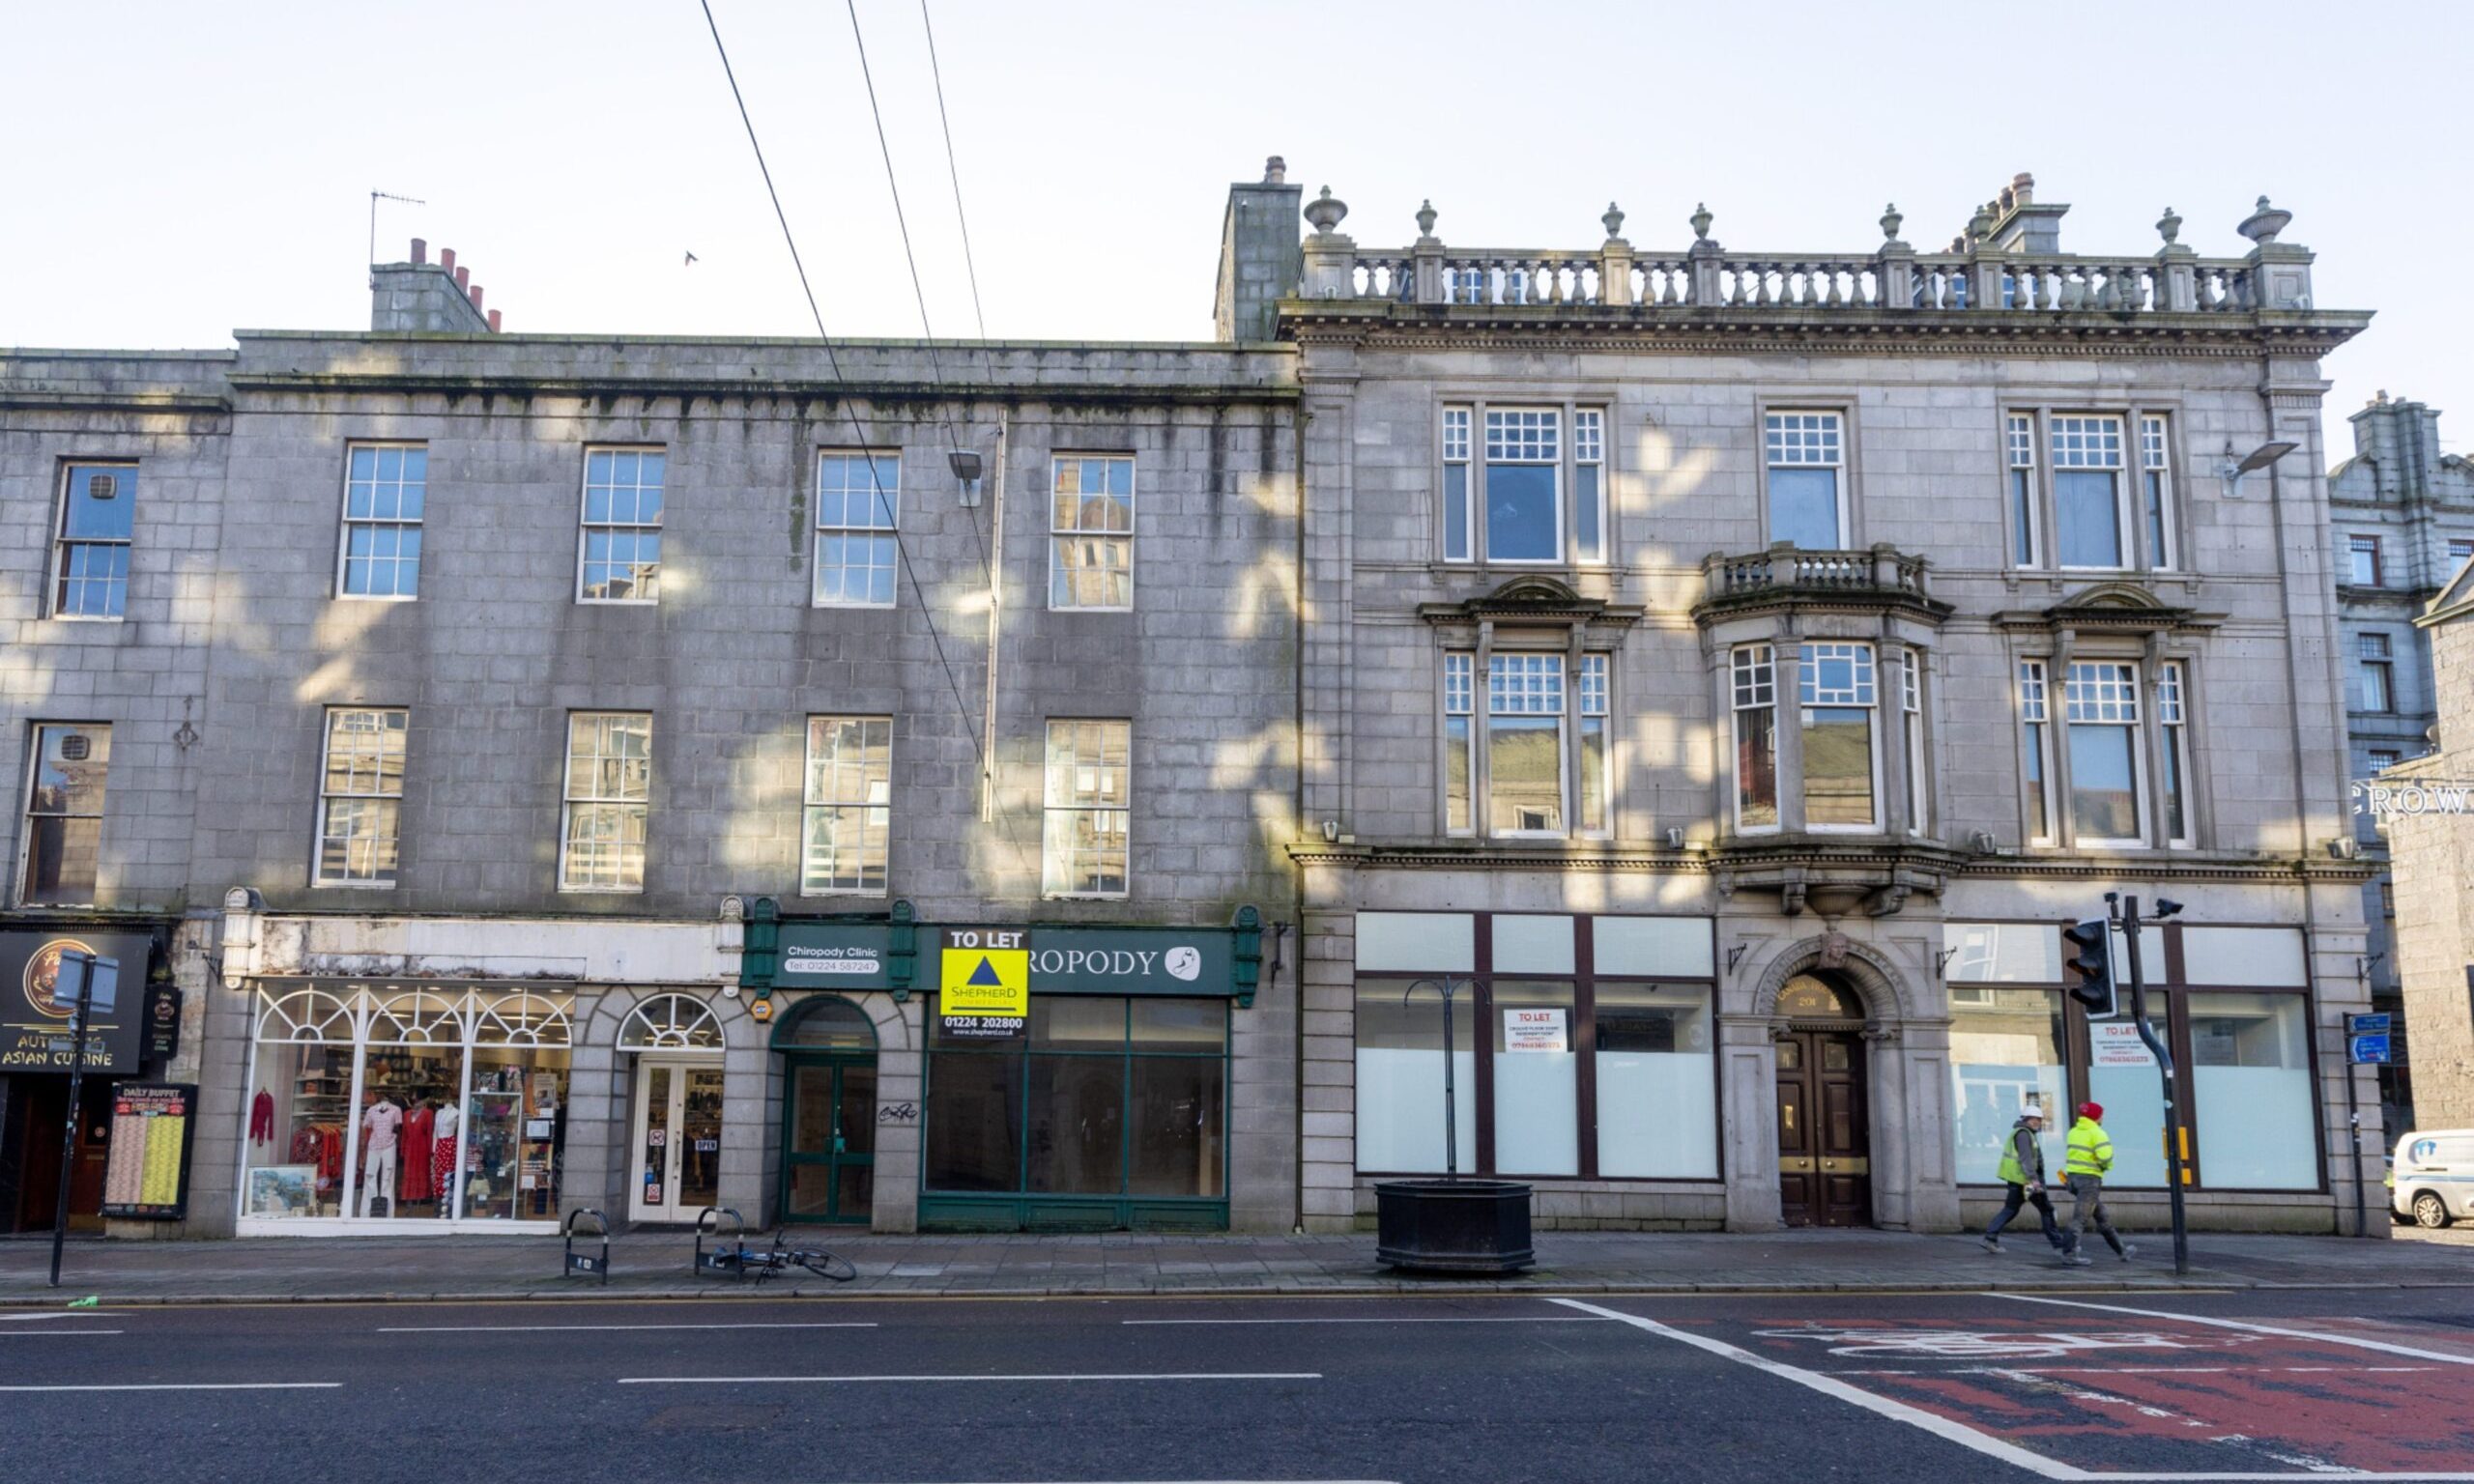 All available empty units on Aberdeen's Union Street have now been listed in a fresh bid to get more businesses on the Granite Mile.